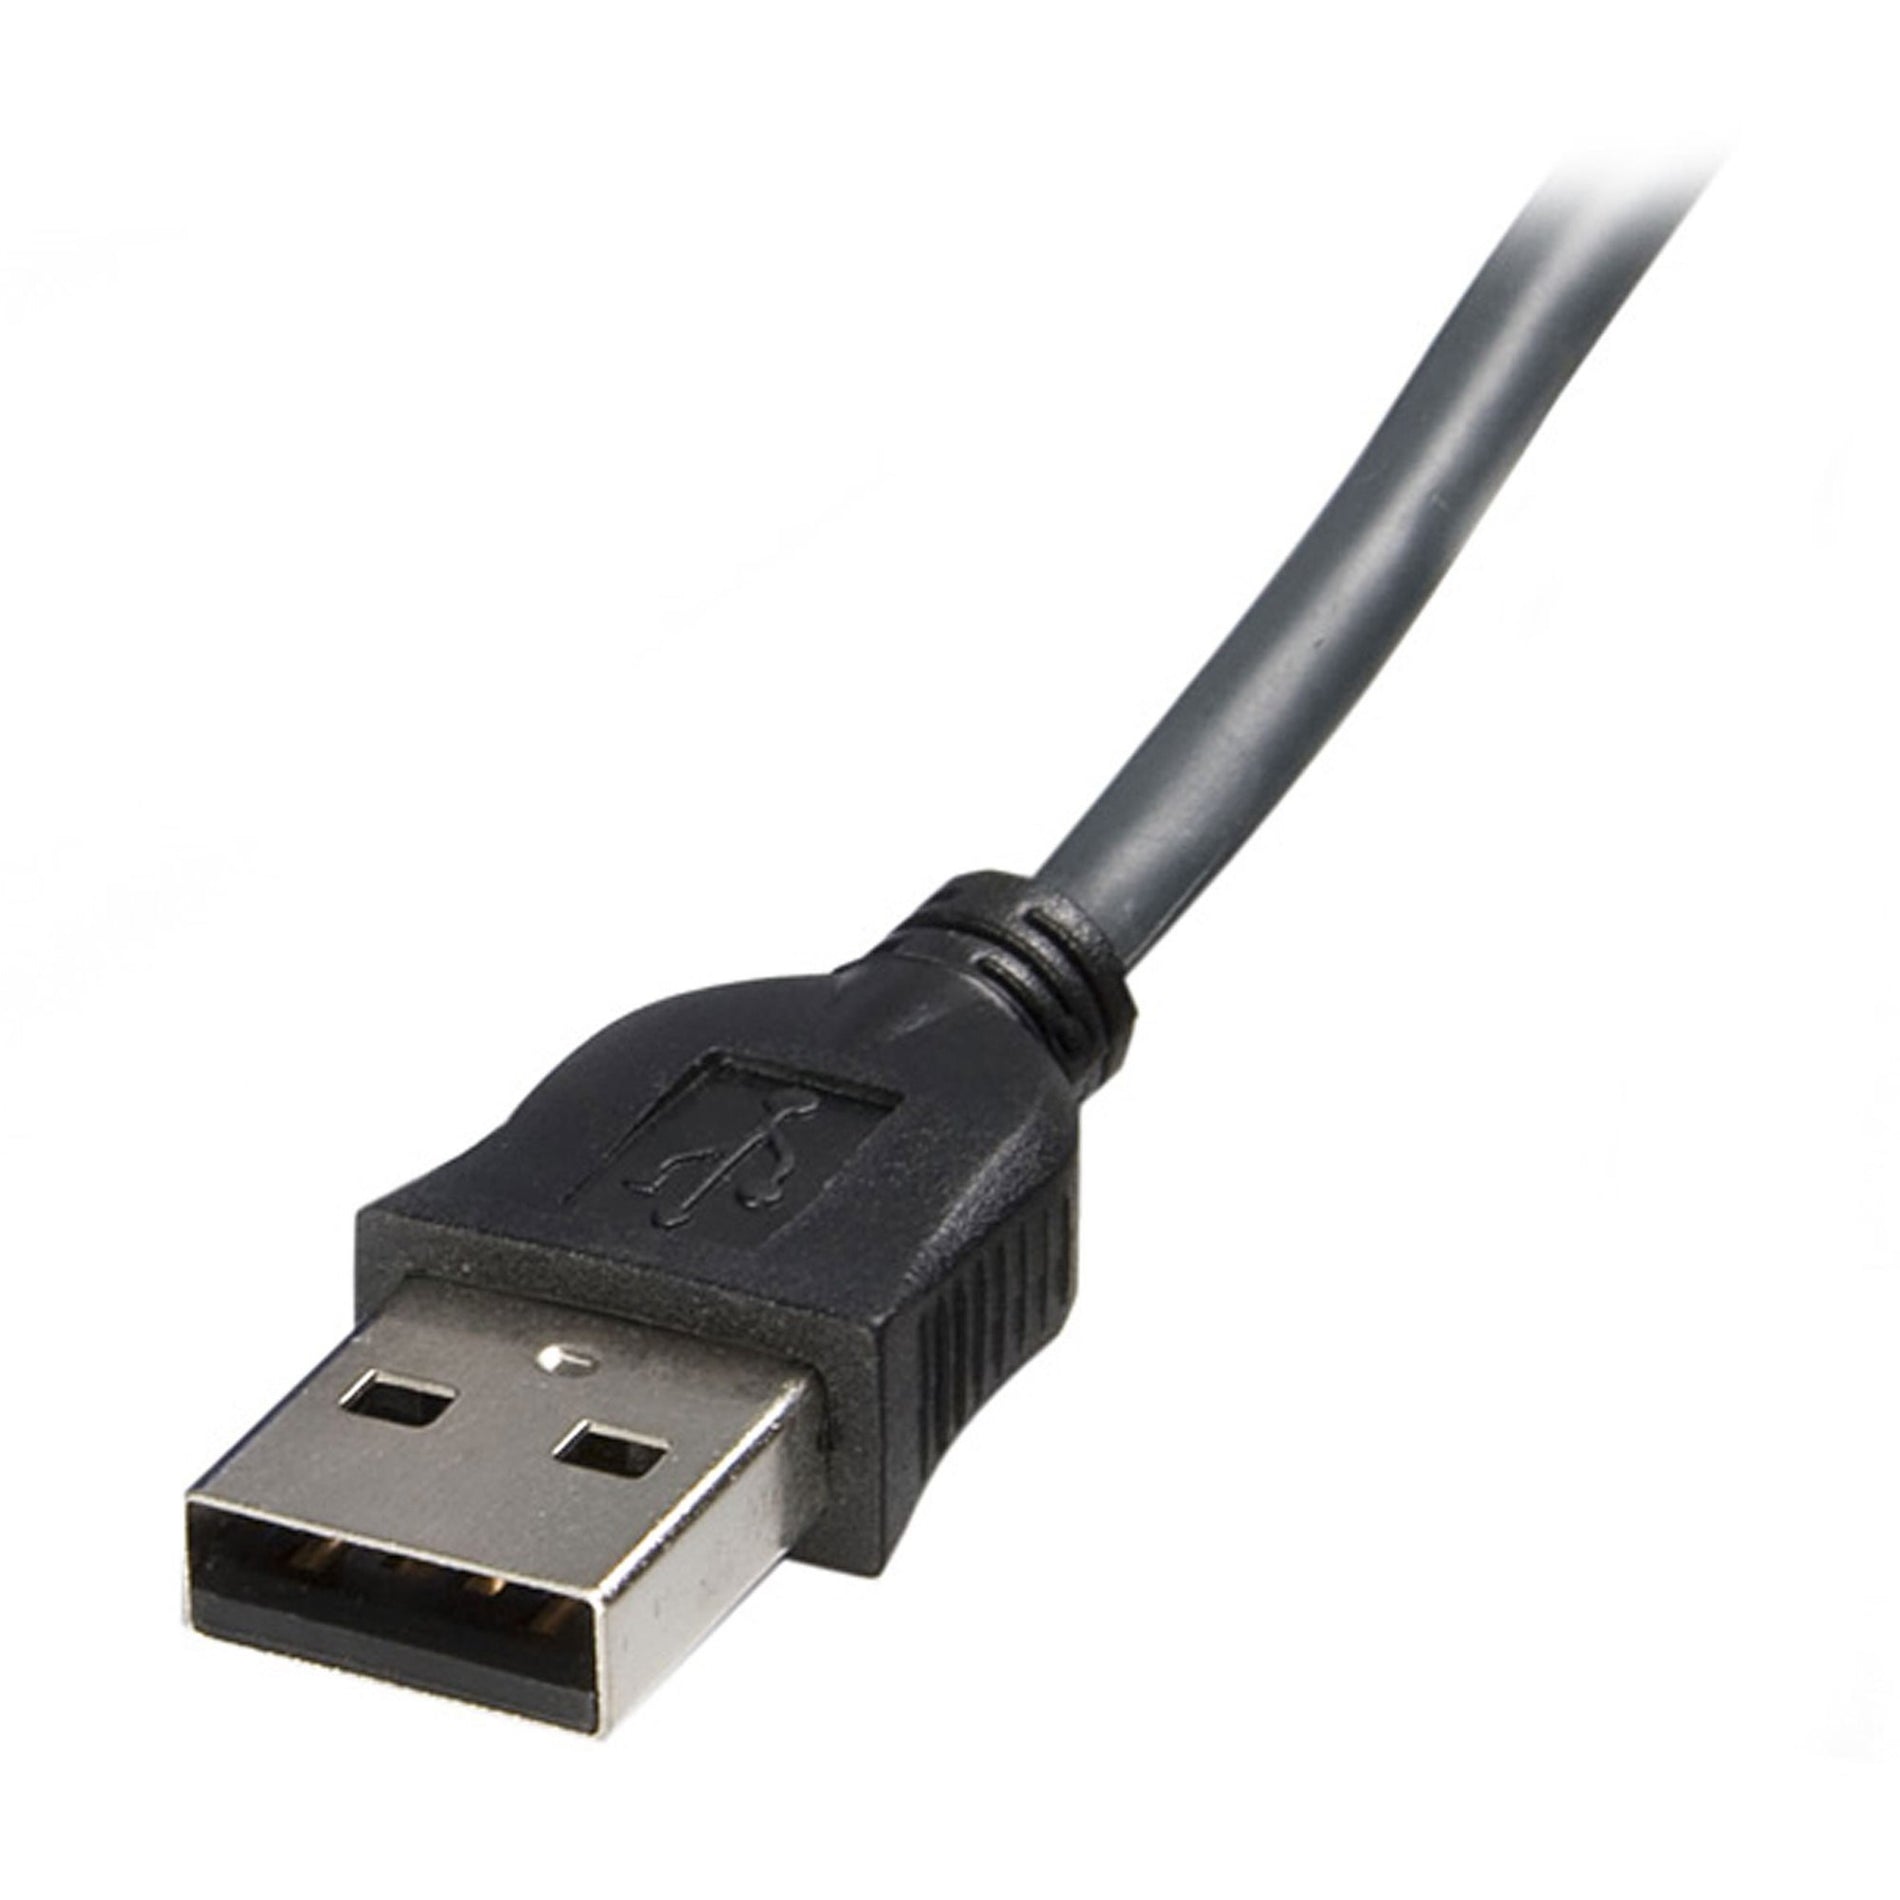 StarTech.com SVUSBVGA10 Ultra-Thin USB VGA 2-in-1 KVM Cable, 10 ft, High Quality, Lifetime Warranty [Discontinued]